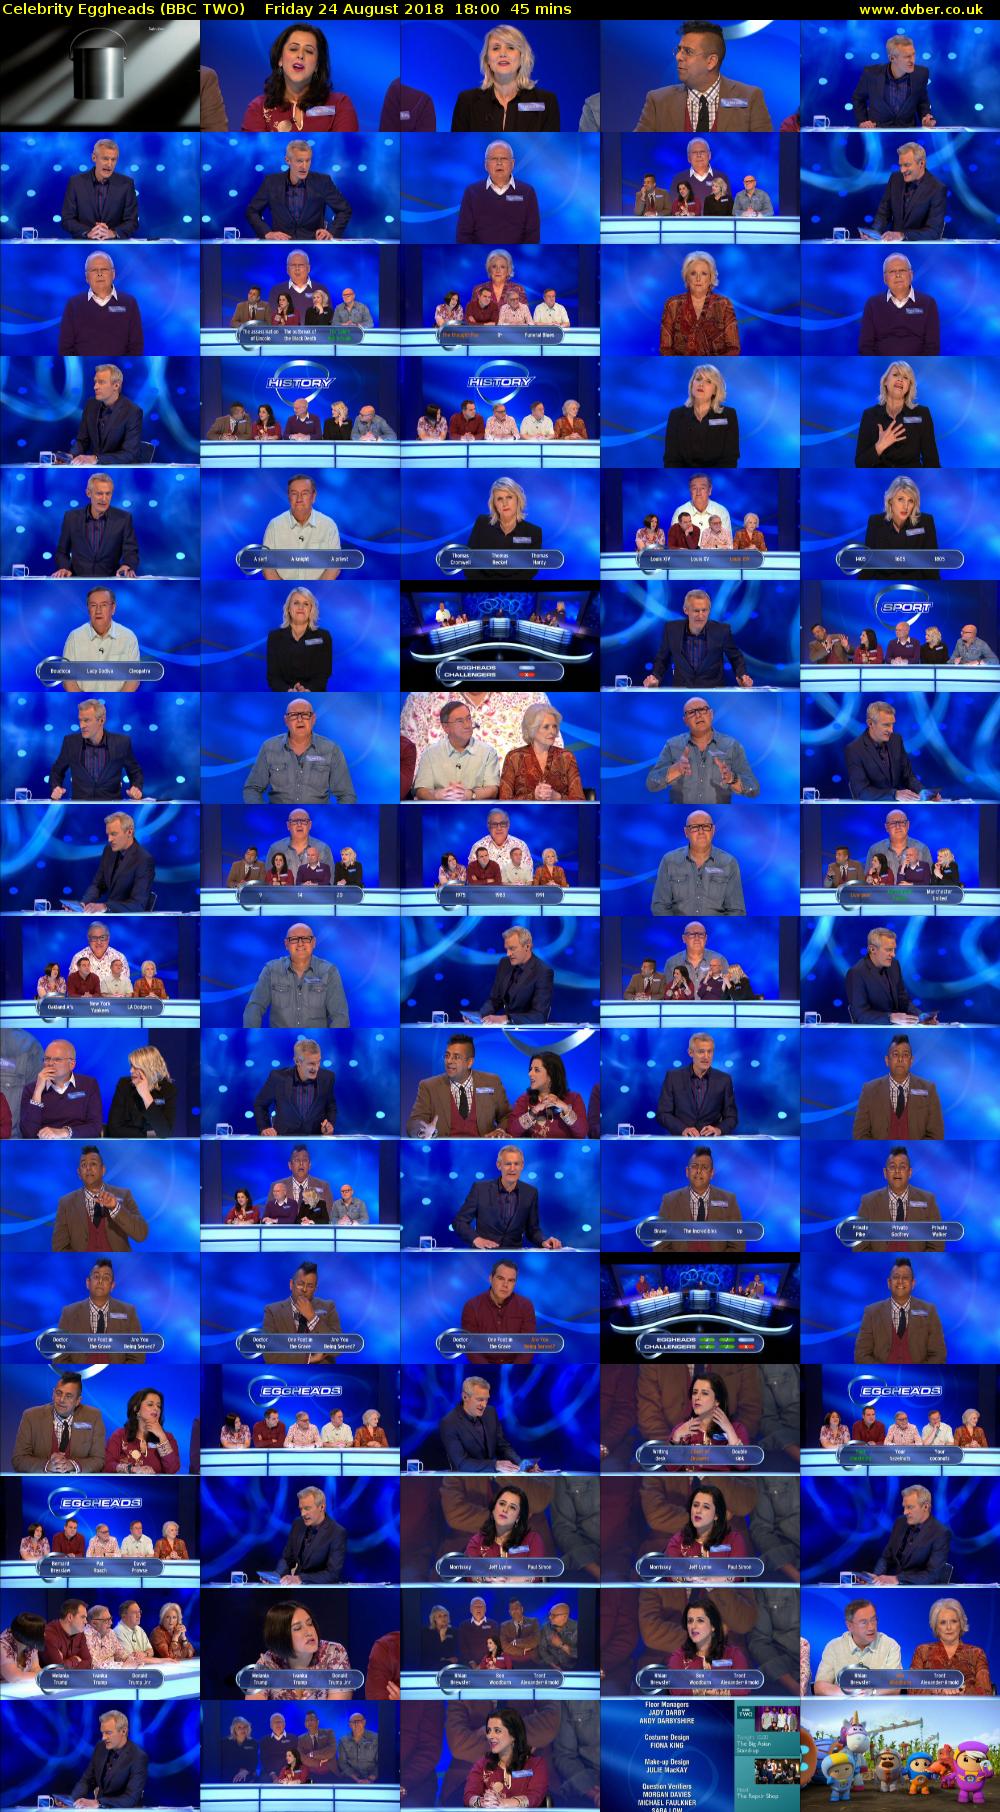 Celebrity Eggheads (BBC TWO) Friday 24 August 2018 18:00 - 18:45